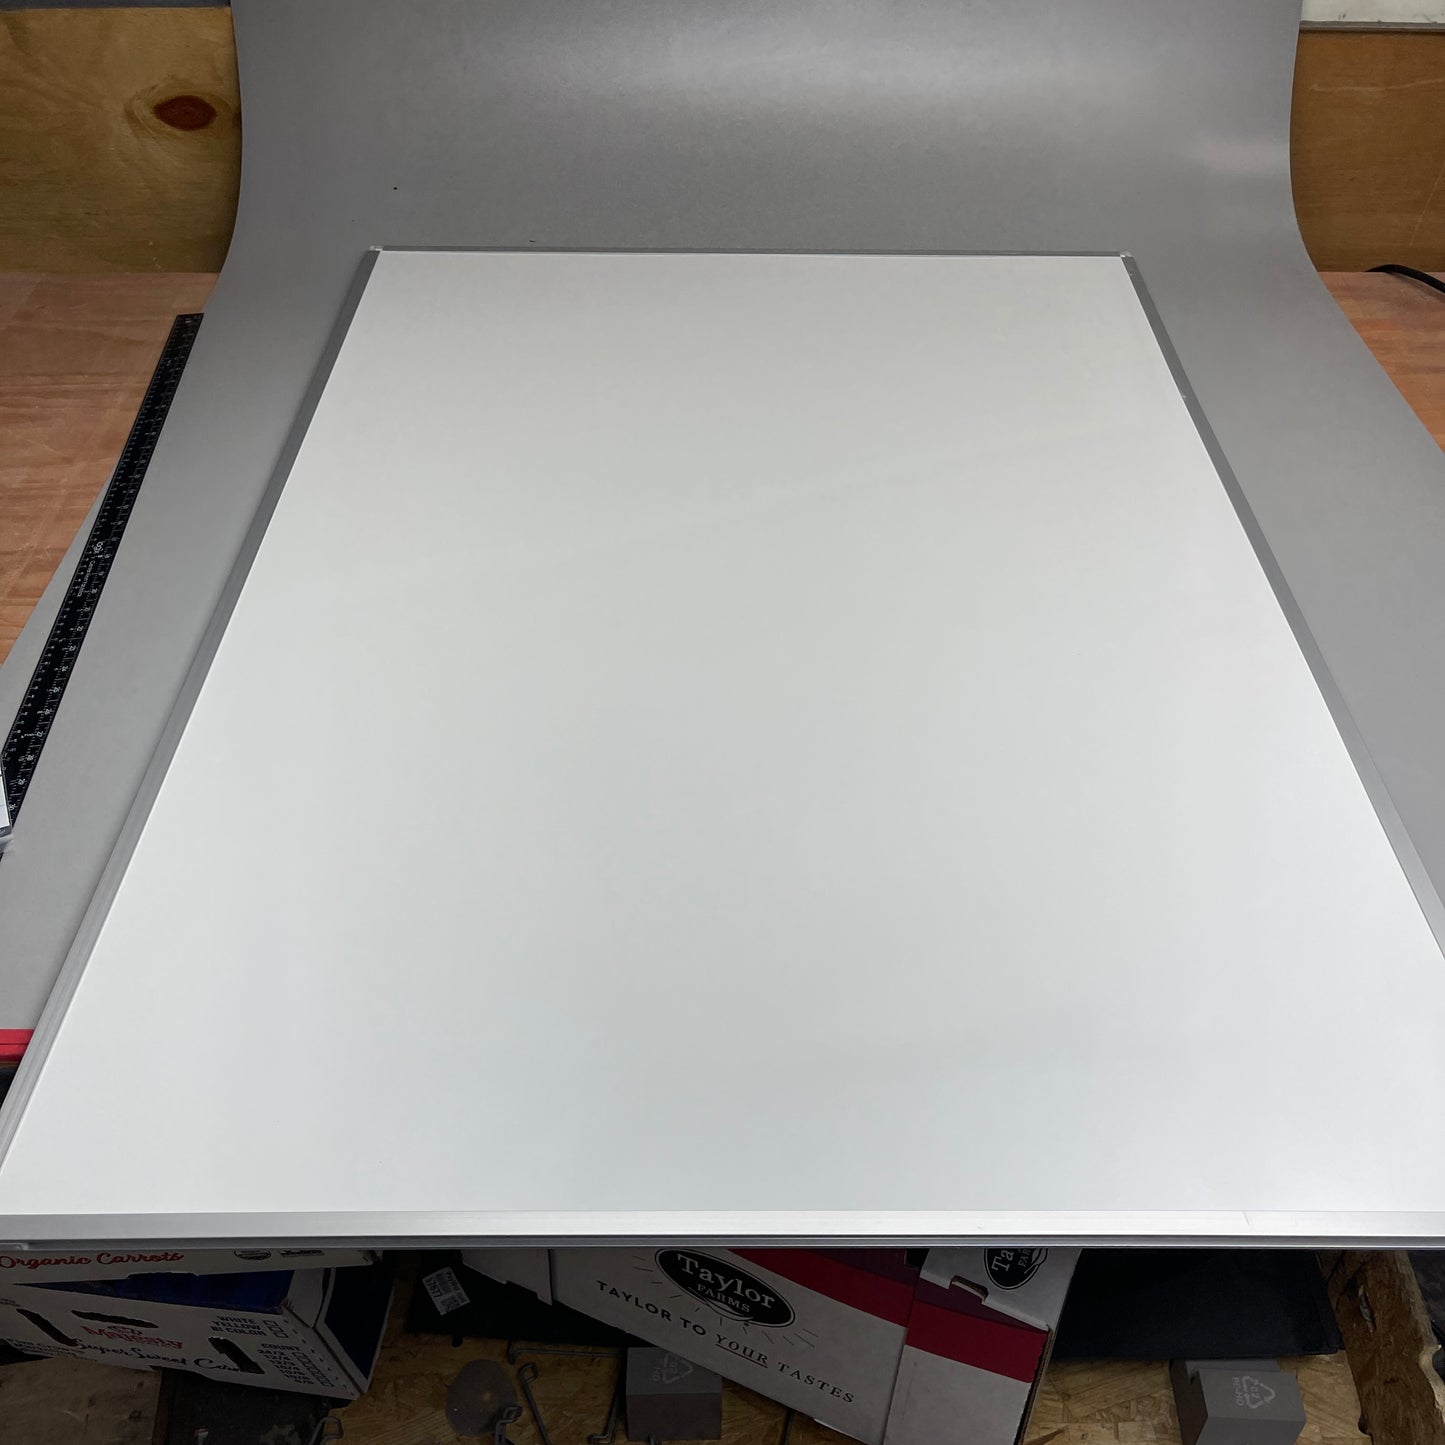 QUARTET Dry Erase Board Wall Mounted 85357N Silver/White 36x48 (new)